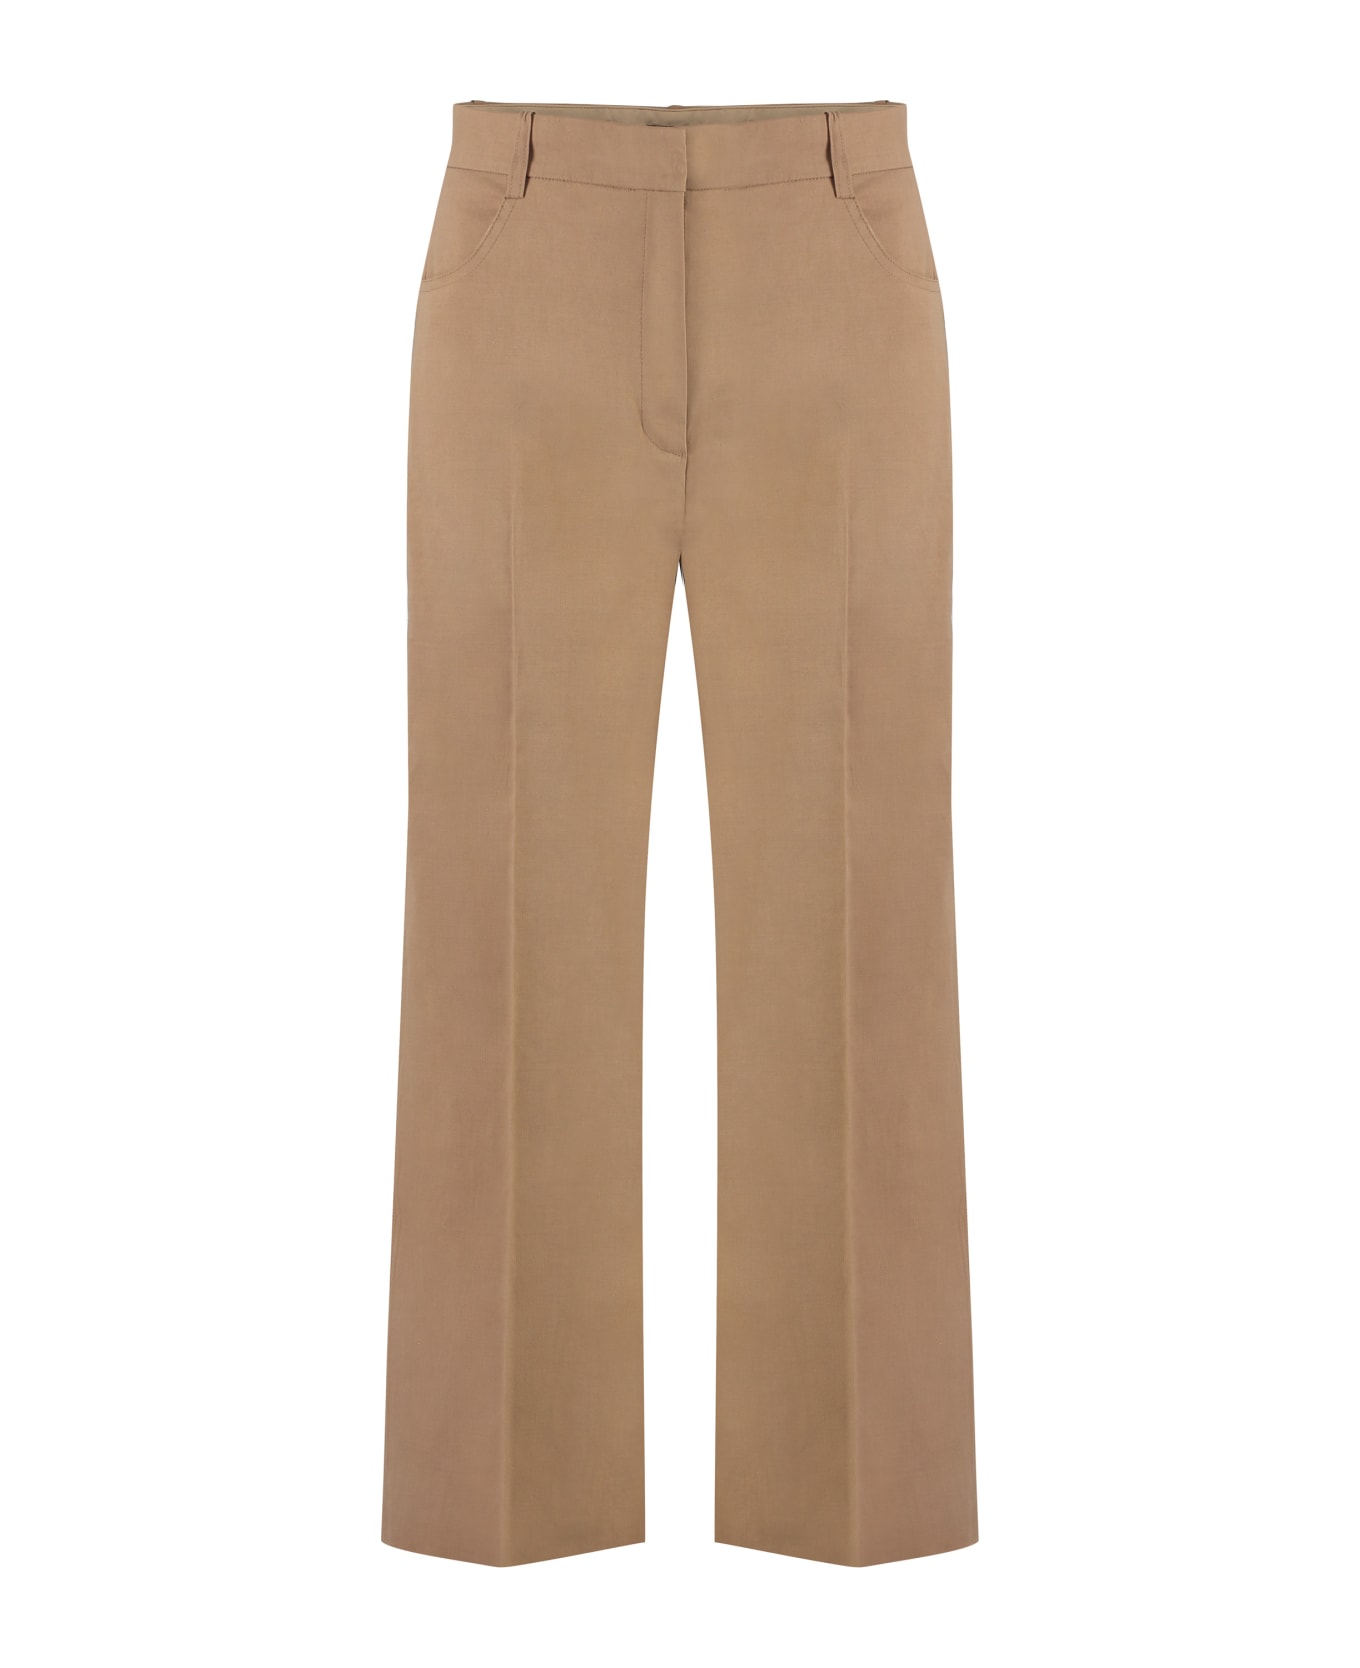 Pinko Protesilao Cropped Trousers - Camel ボトムス